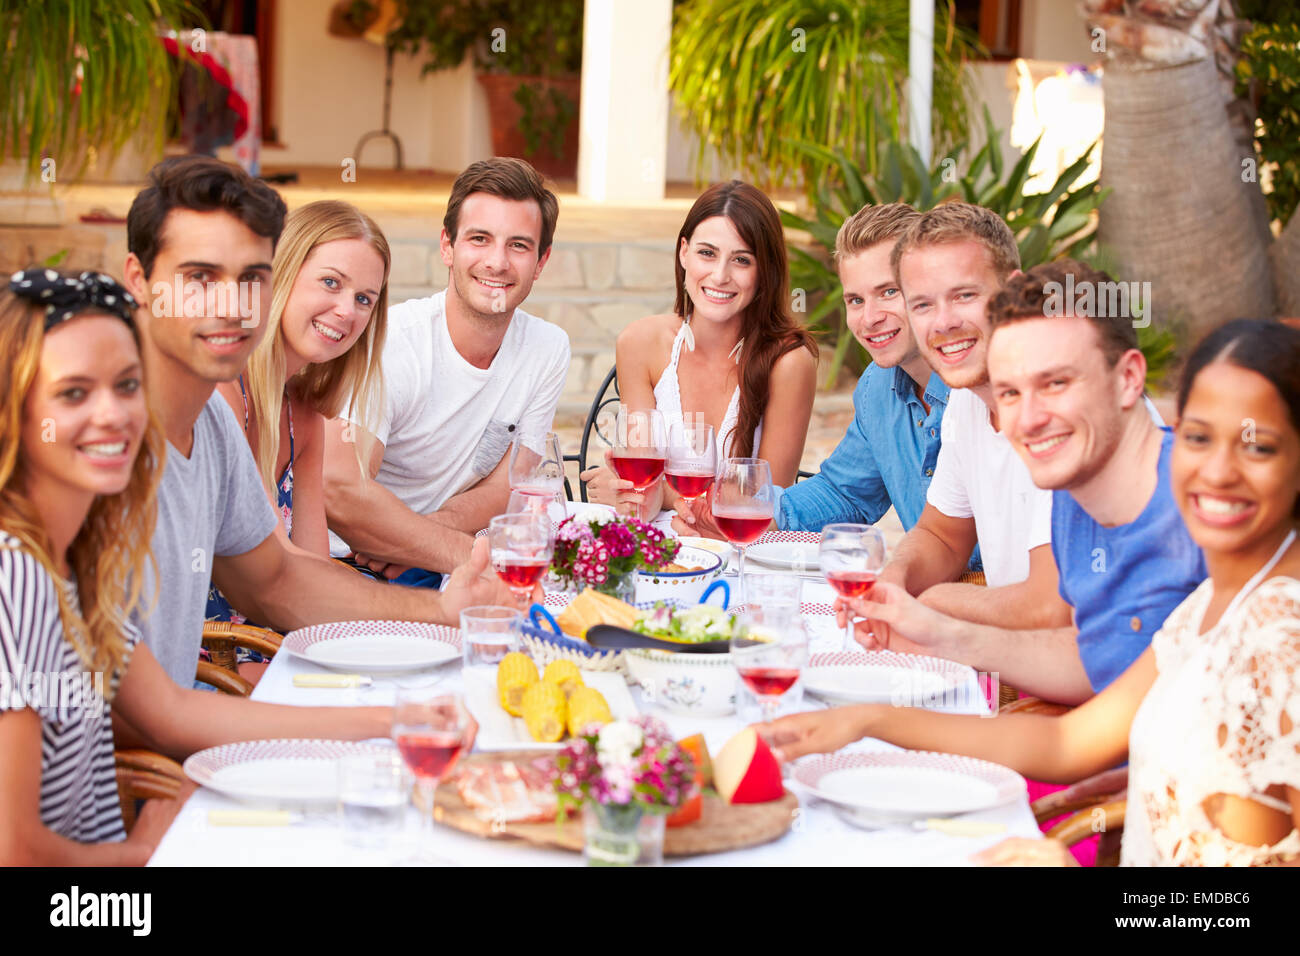 Large Group Of Young Friends Enjoying Outdoor Meal Together Stock Photo